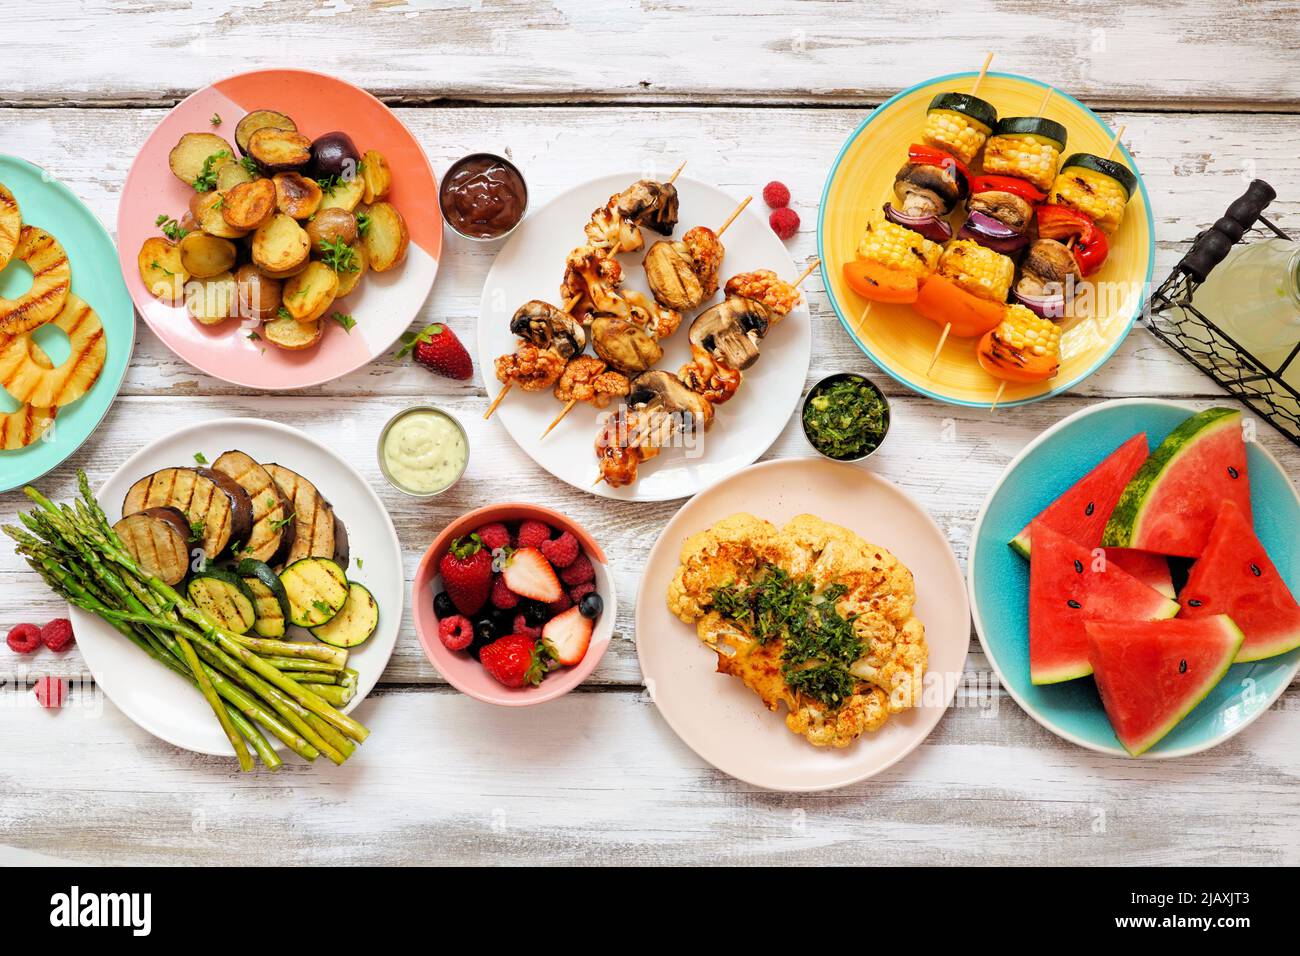 Healthy plant based summer bbq table scene. Top view on a white wood background. Fruit, grilled vegetables, skewers, cauliflower steak and lemonade. M Stock Photo